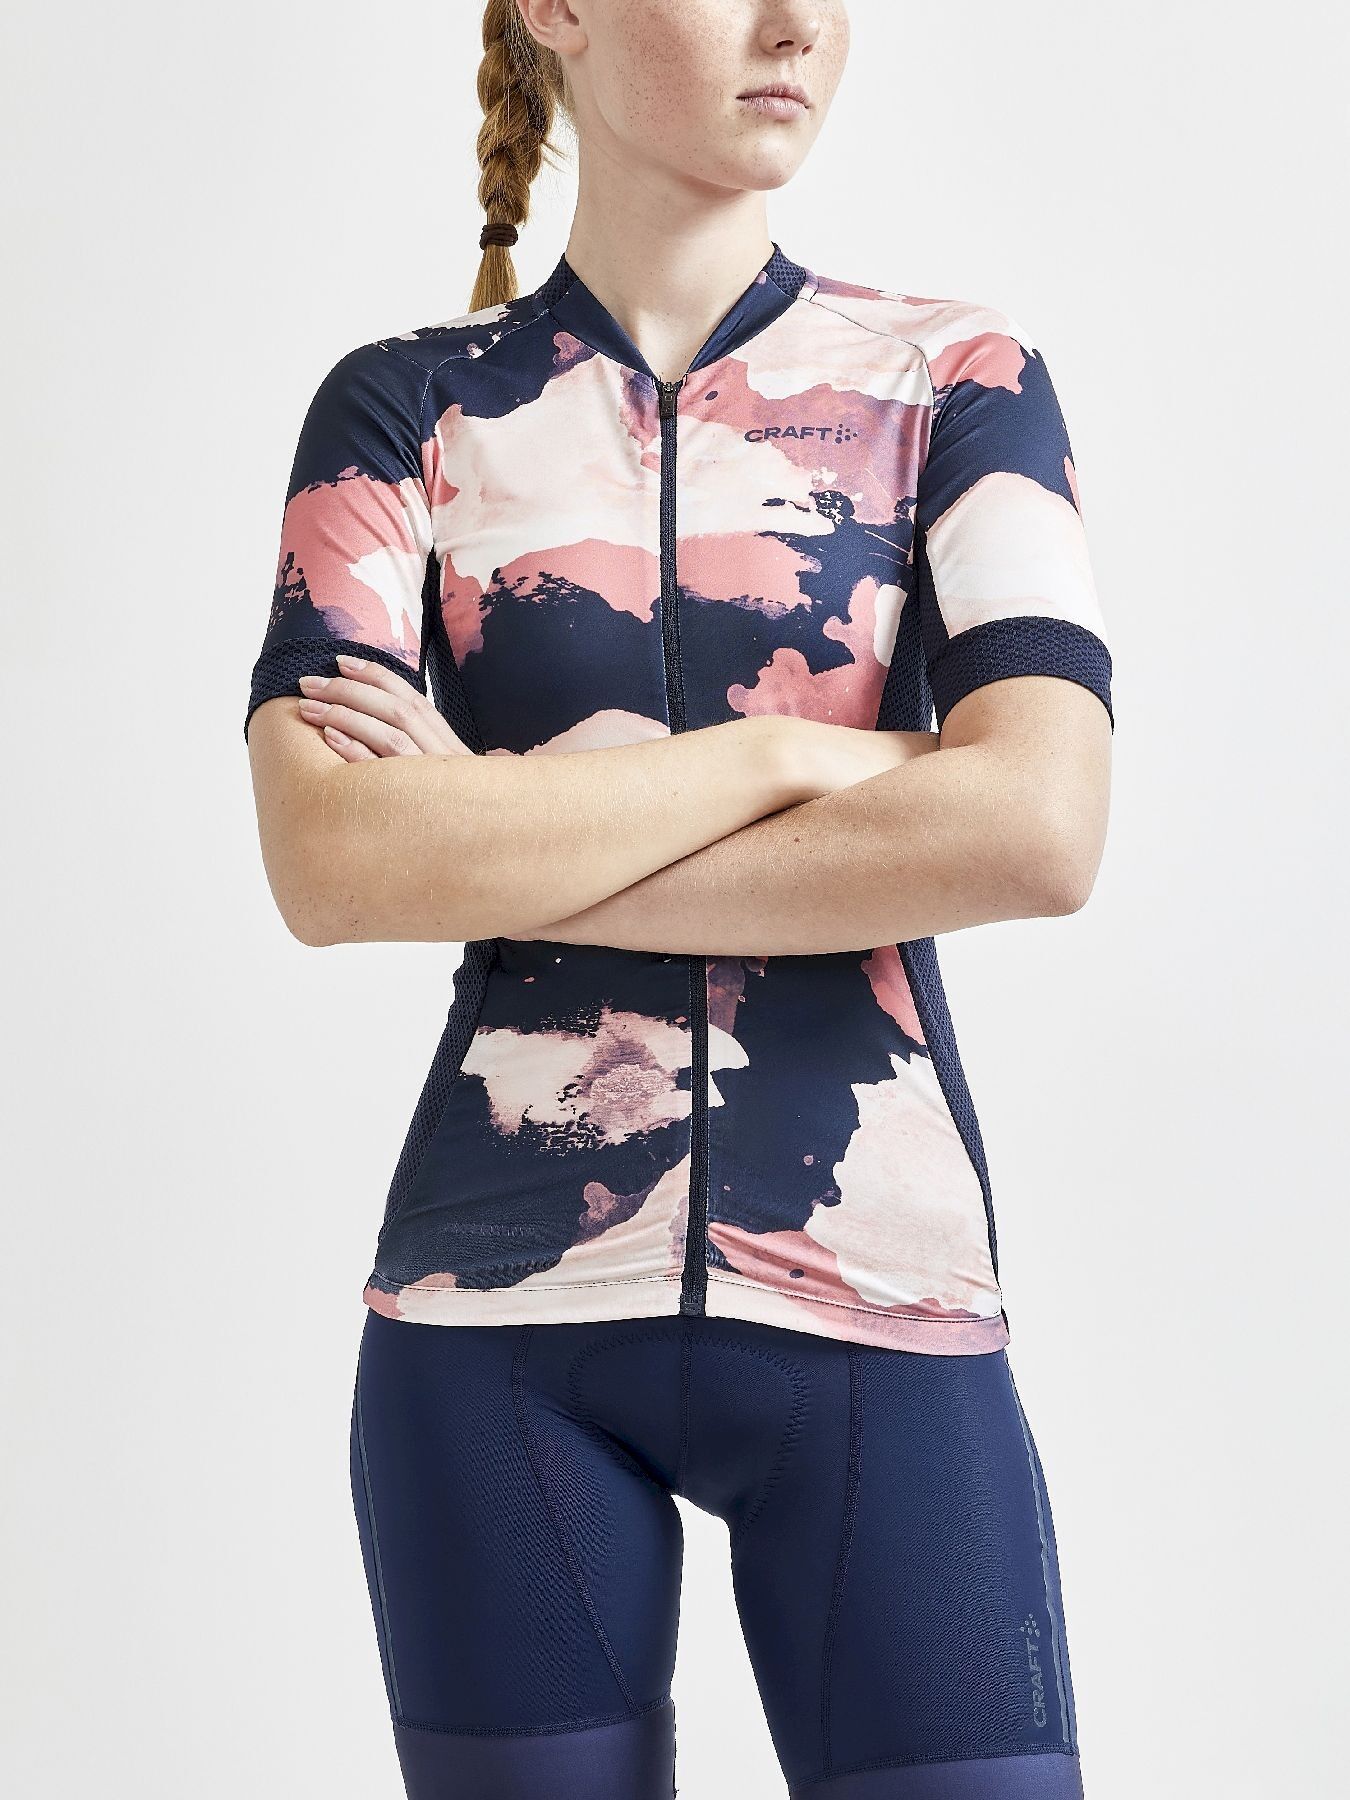 Craft Adv Endurance Graphic Jersey - Maillot ciclismo - Mujer